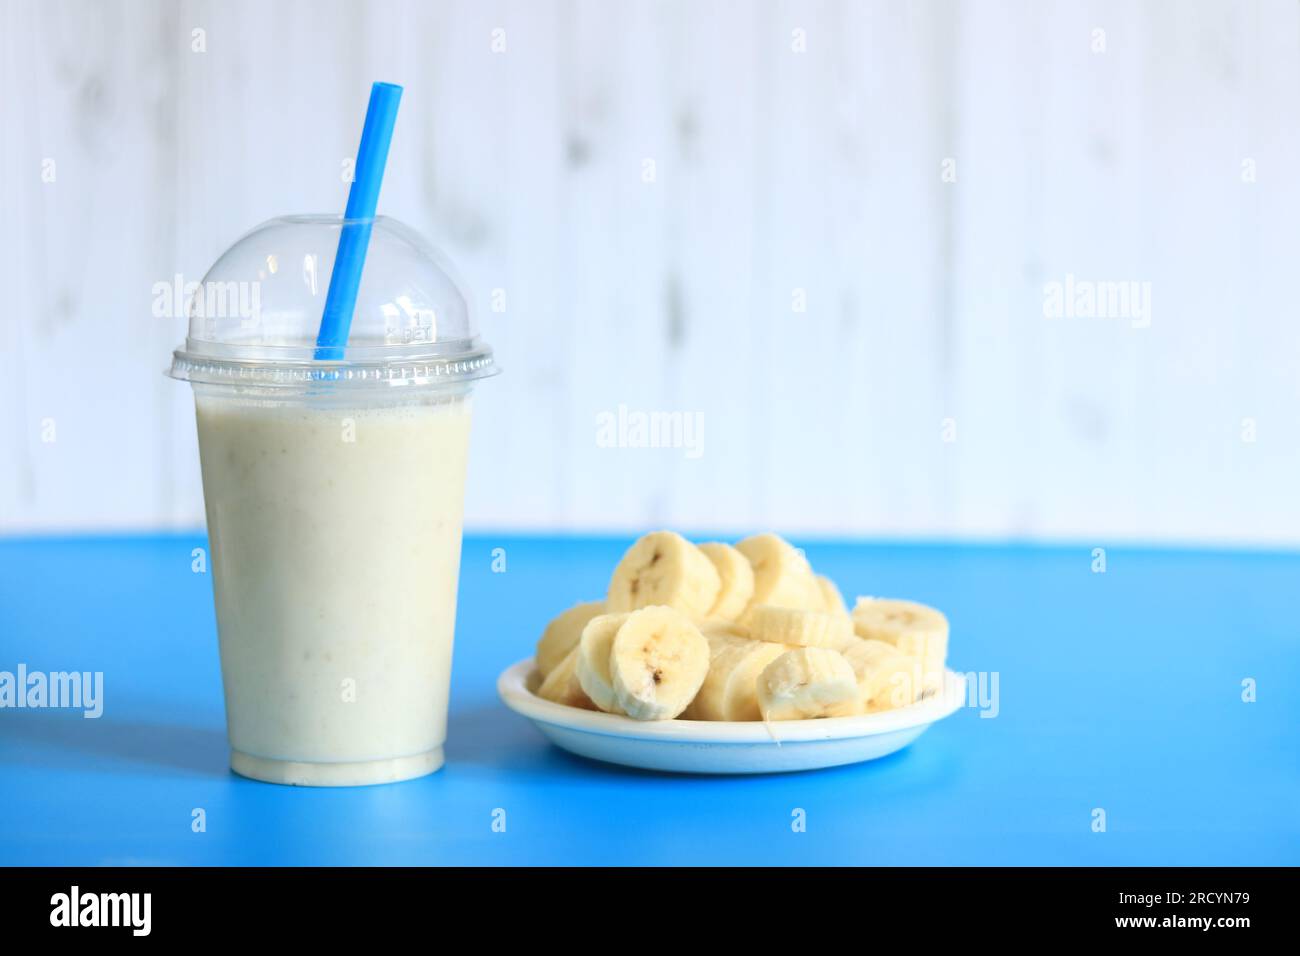 https://c8.alamy.com/comp/2RCYN79/banana-smoothie-with-a-plastic-disposable-cup-a-plate-with-a-sliced-banana-next-to-it-banana-milkshake-2RCYN79.jpg